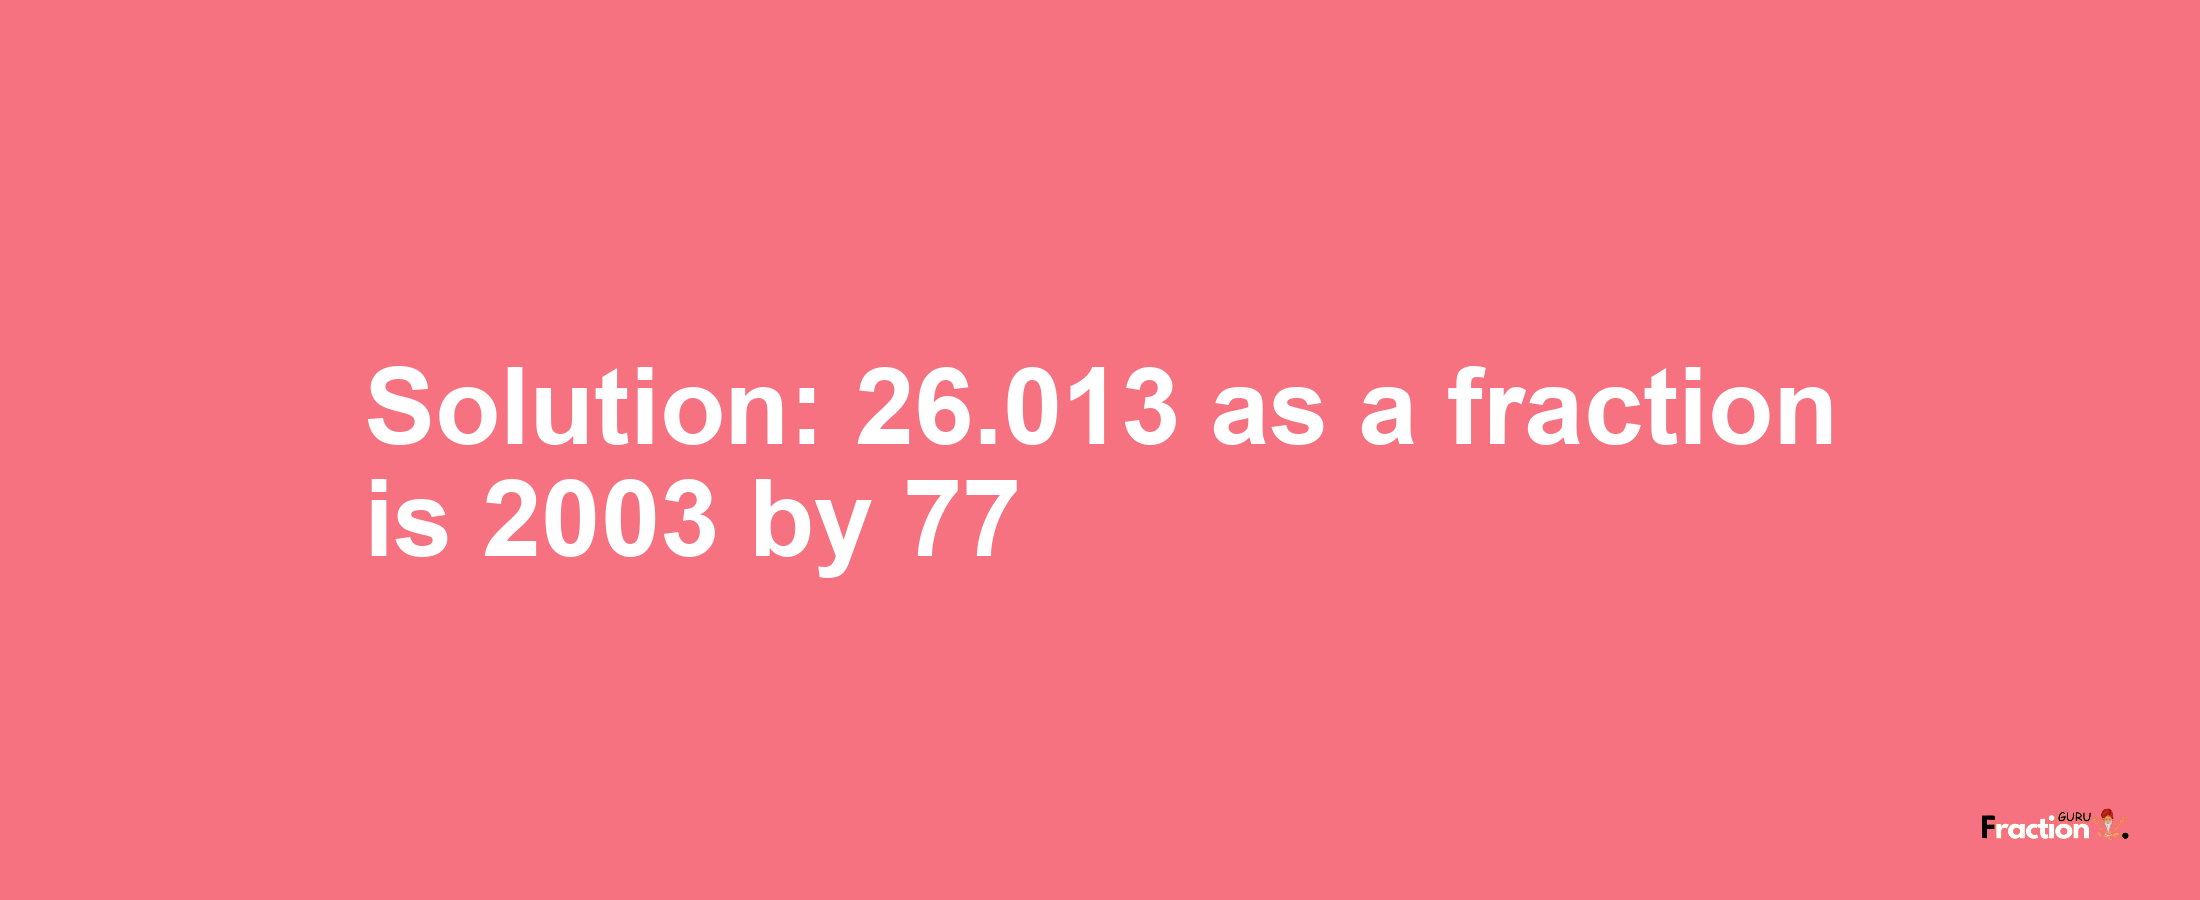 Solution:26.013 as a fraction is 2003/77